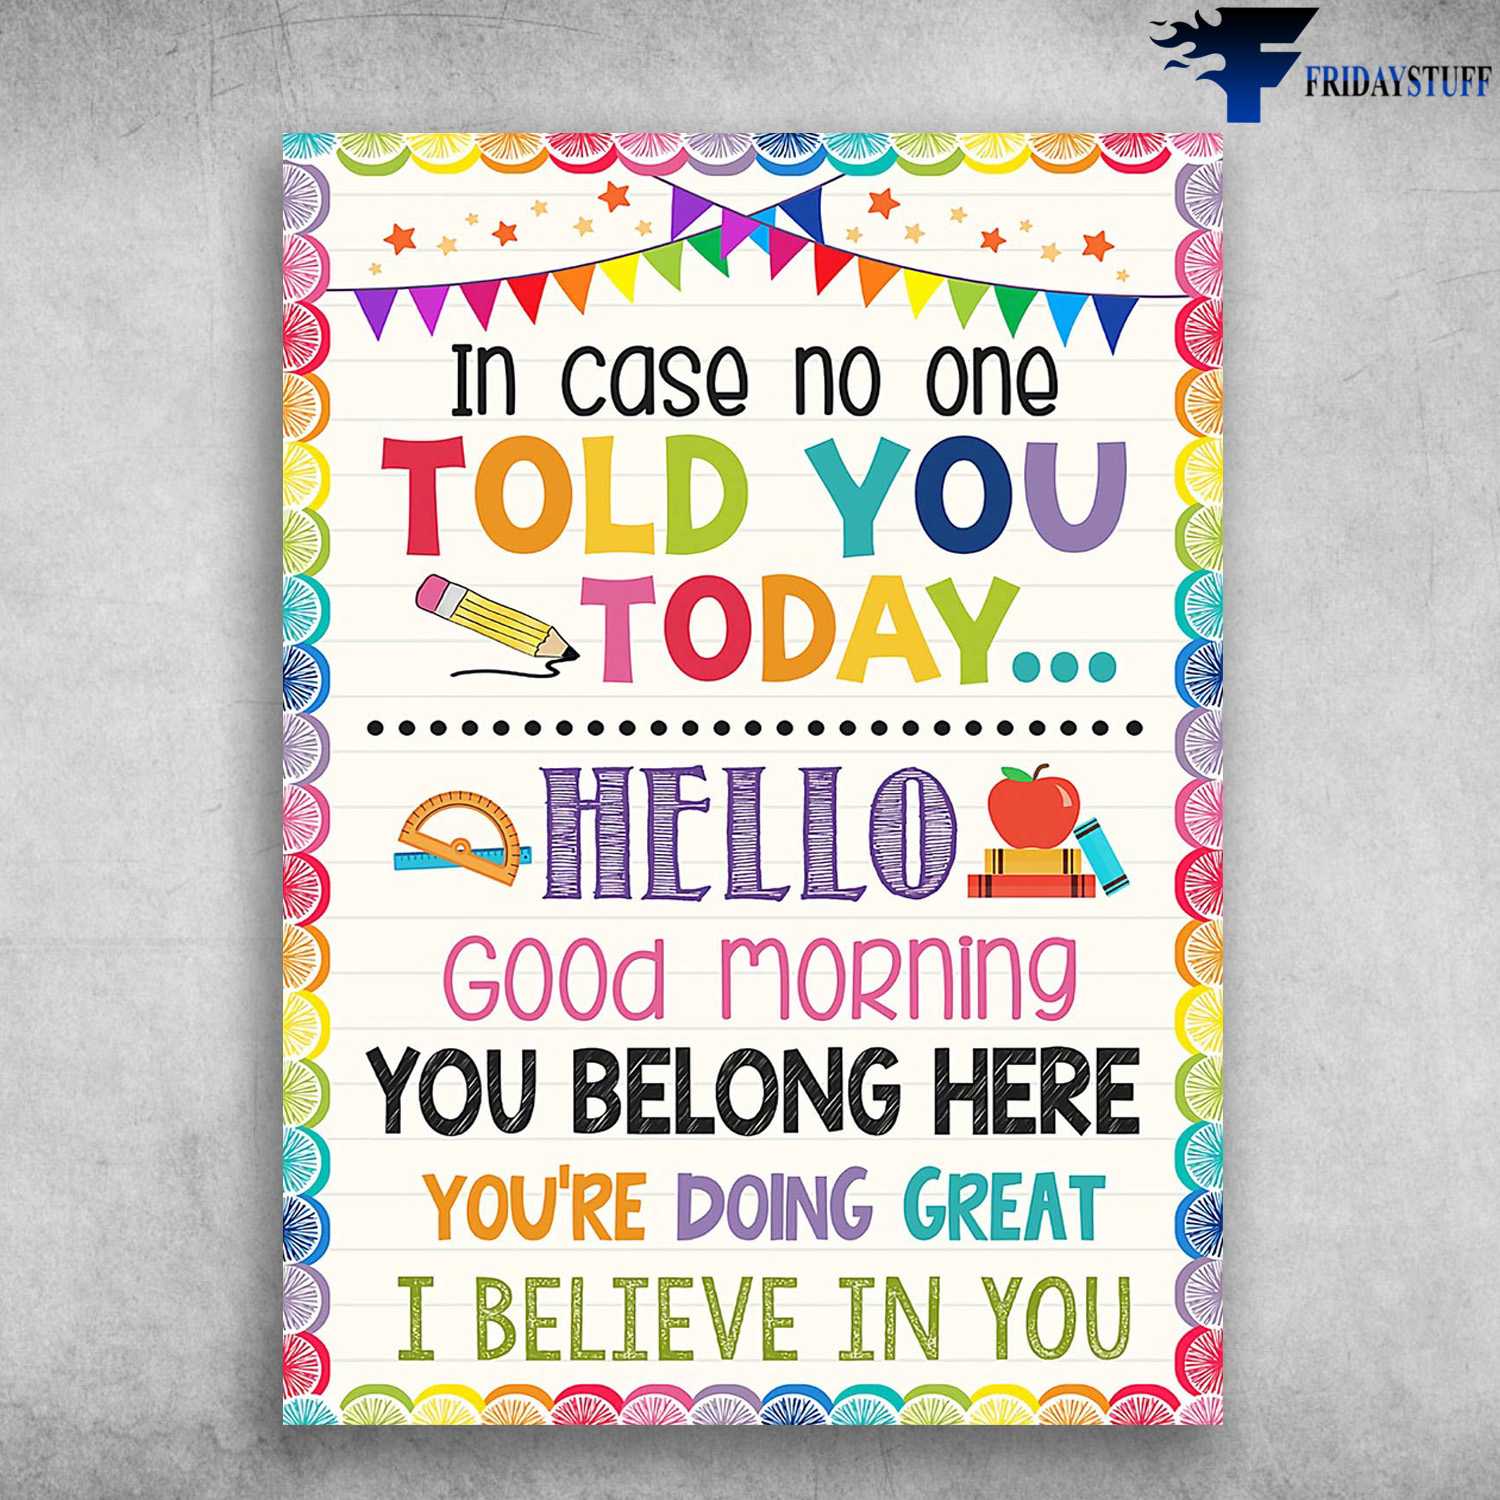 Classroom Poster, In Case No One Told You Today, Hello Good Morning, You Belong Here, You're Doing Great, I Believe In You